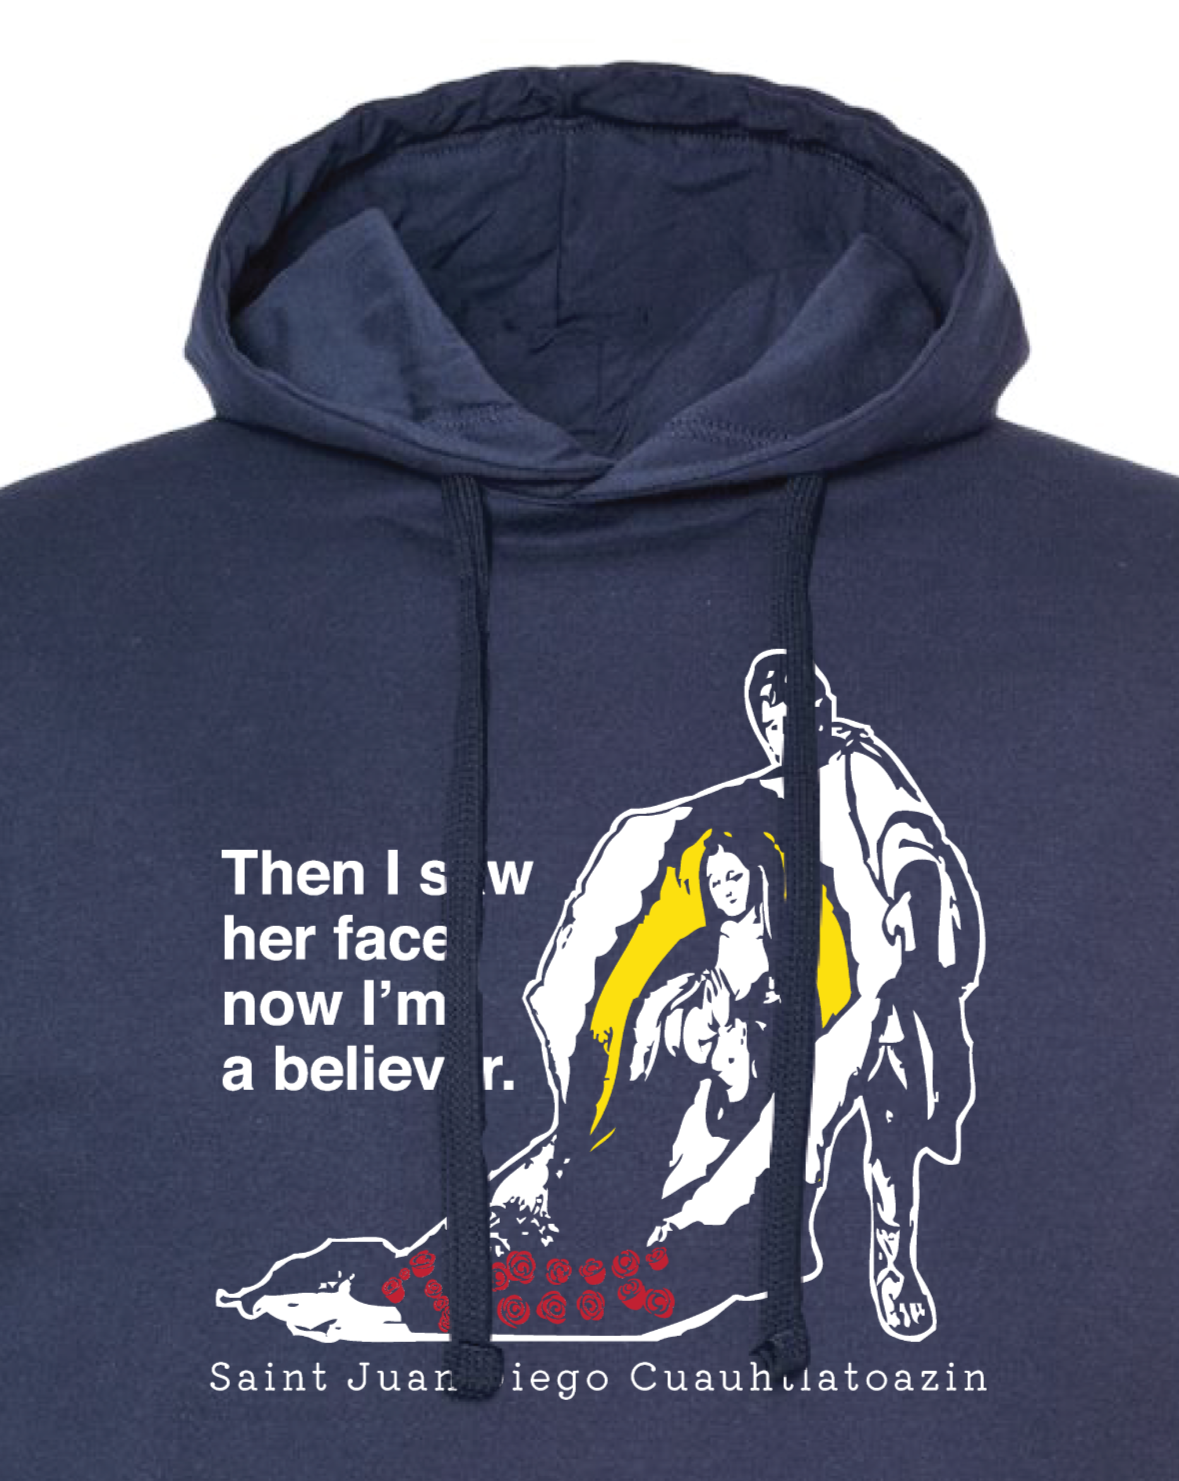 Then I Saw Her Face - St. Juan Diego Sweatshirt (Hooded)